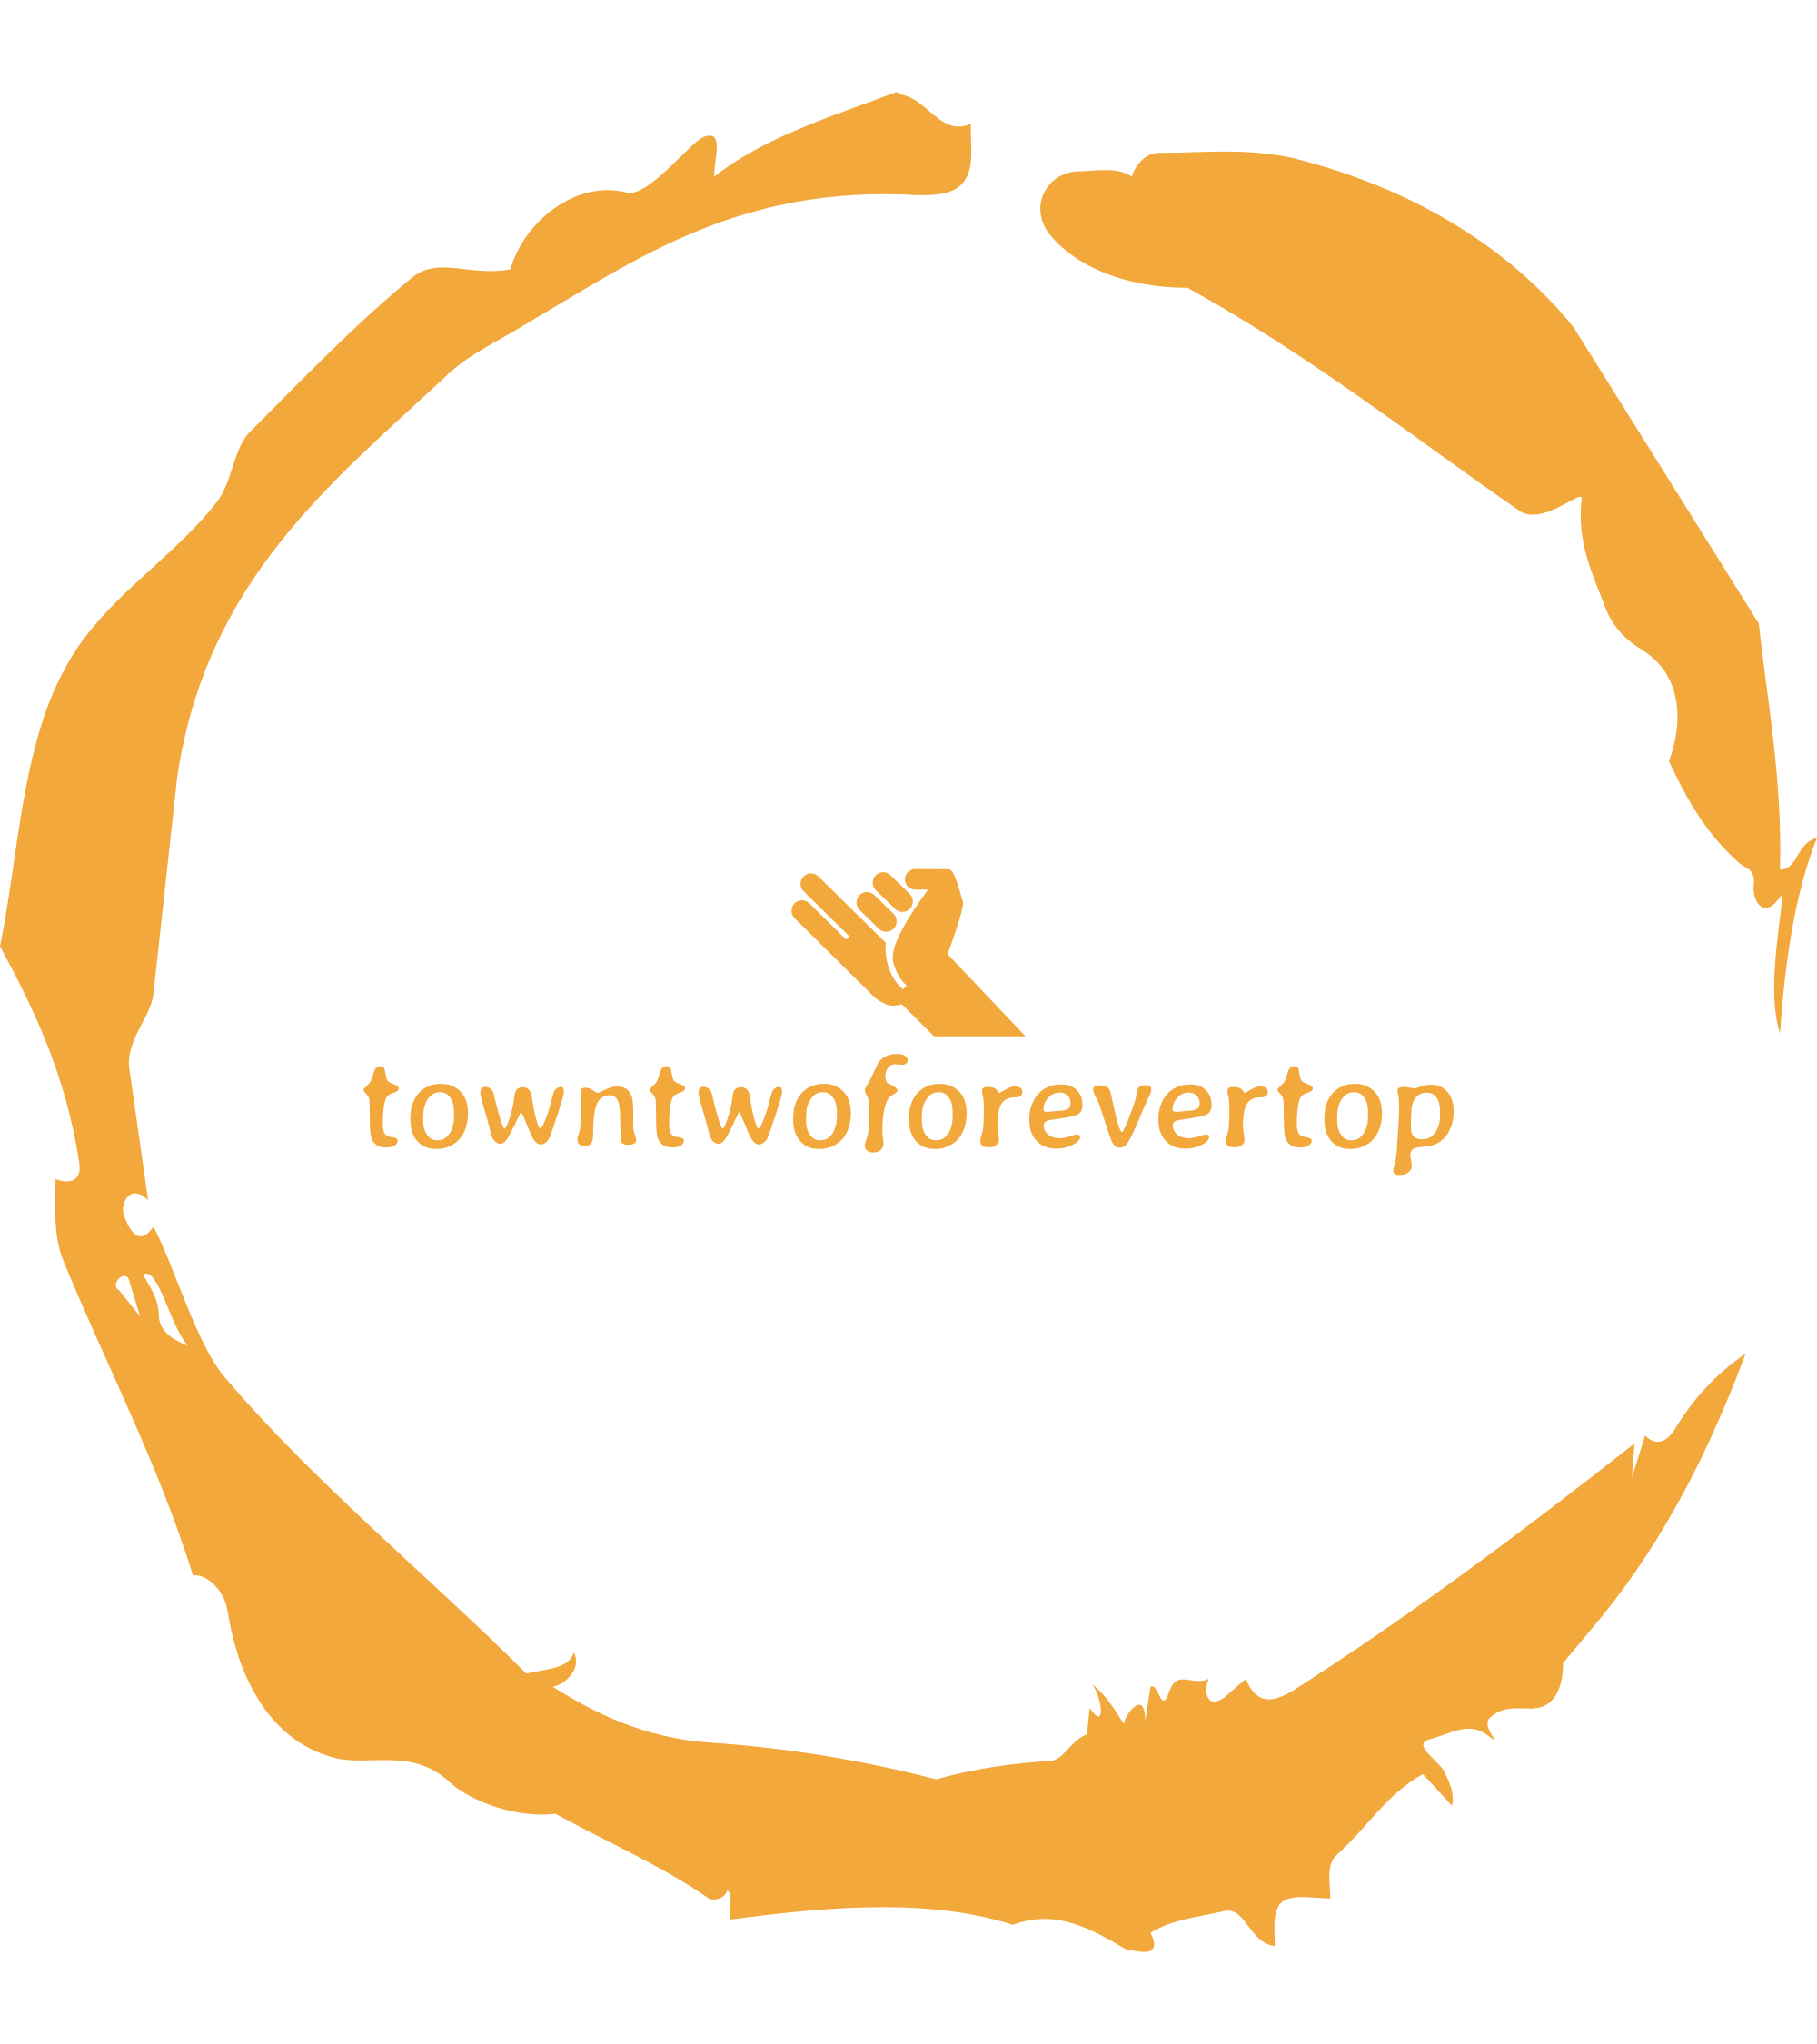 towntwoforevertop